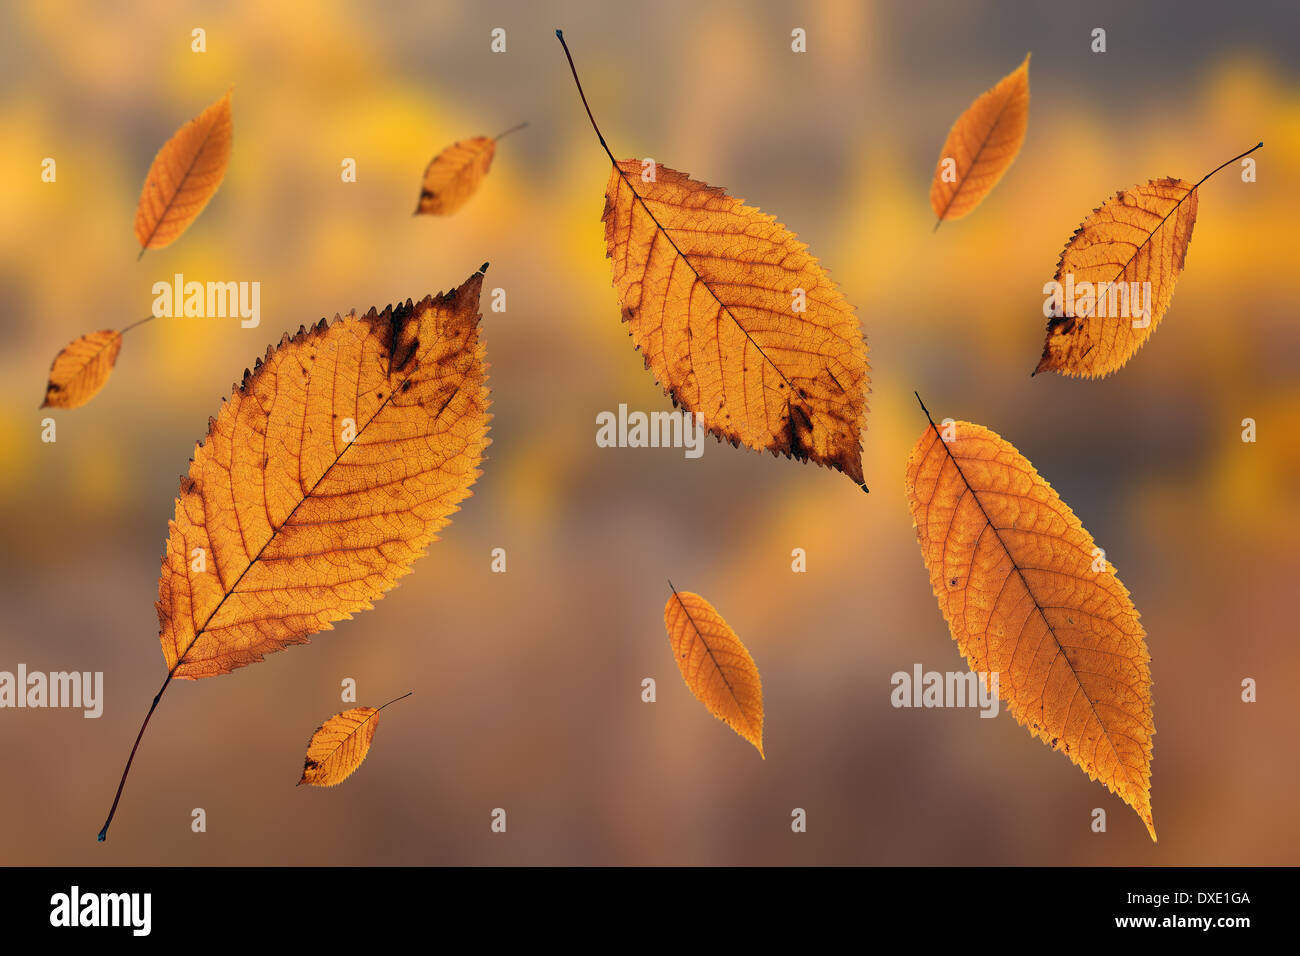 autumn is coming, concept with faded cherry leaves falling from tree over out of focus color background Stock Photo